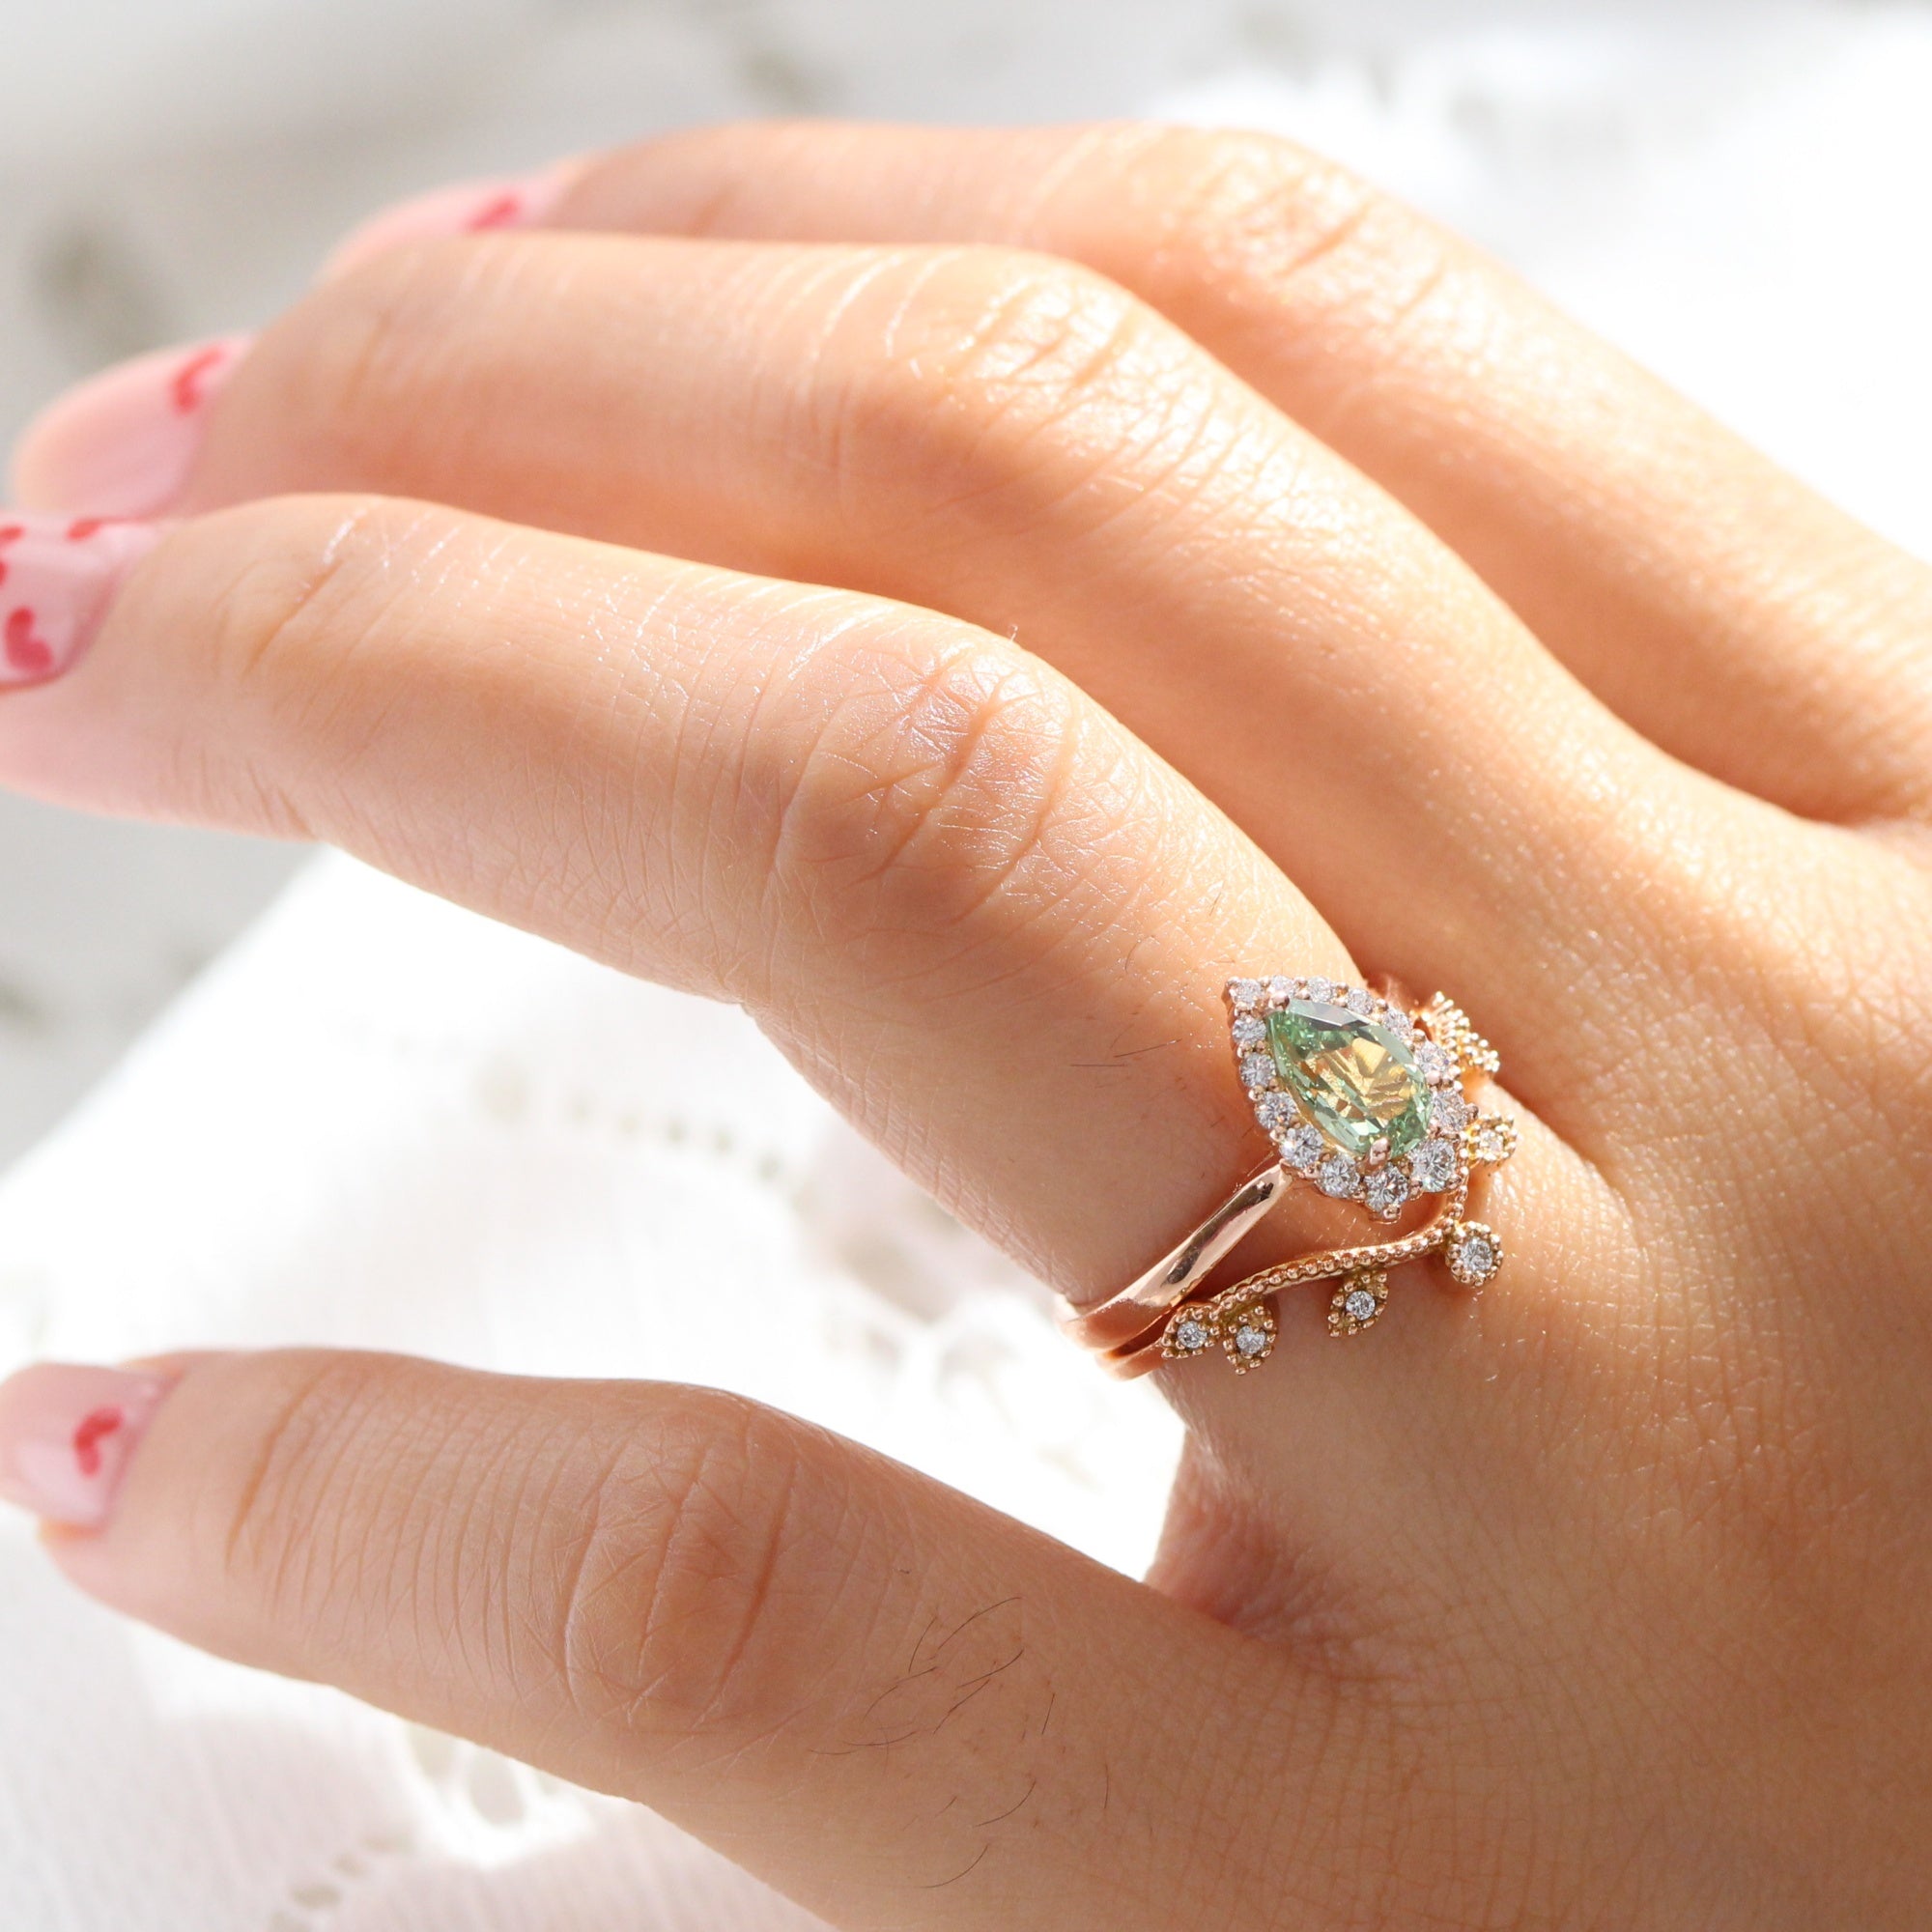 Pear green sapphire ring rose gold curved leaf diamond wedding band la more design jewelry